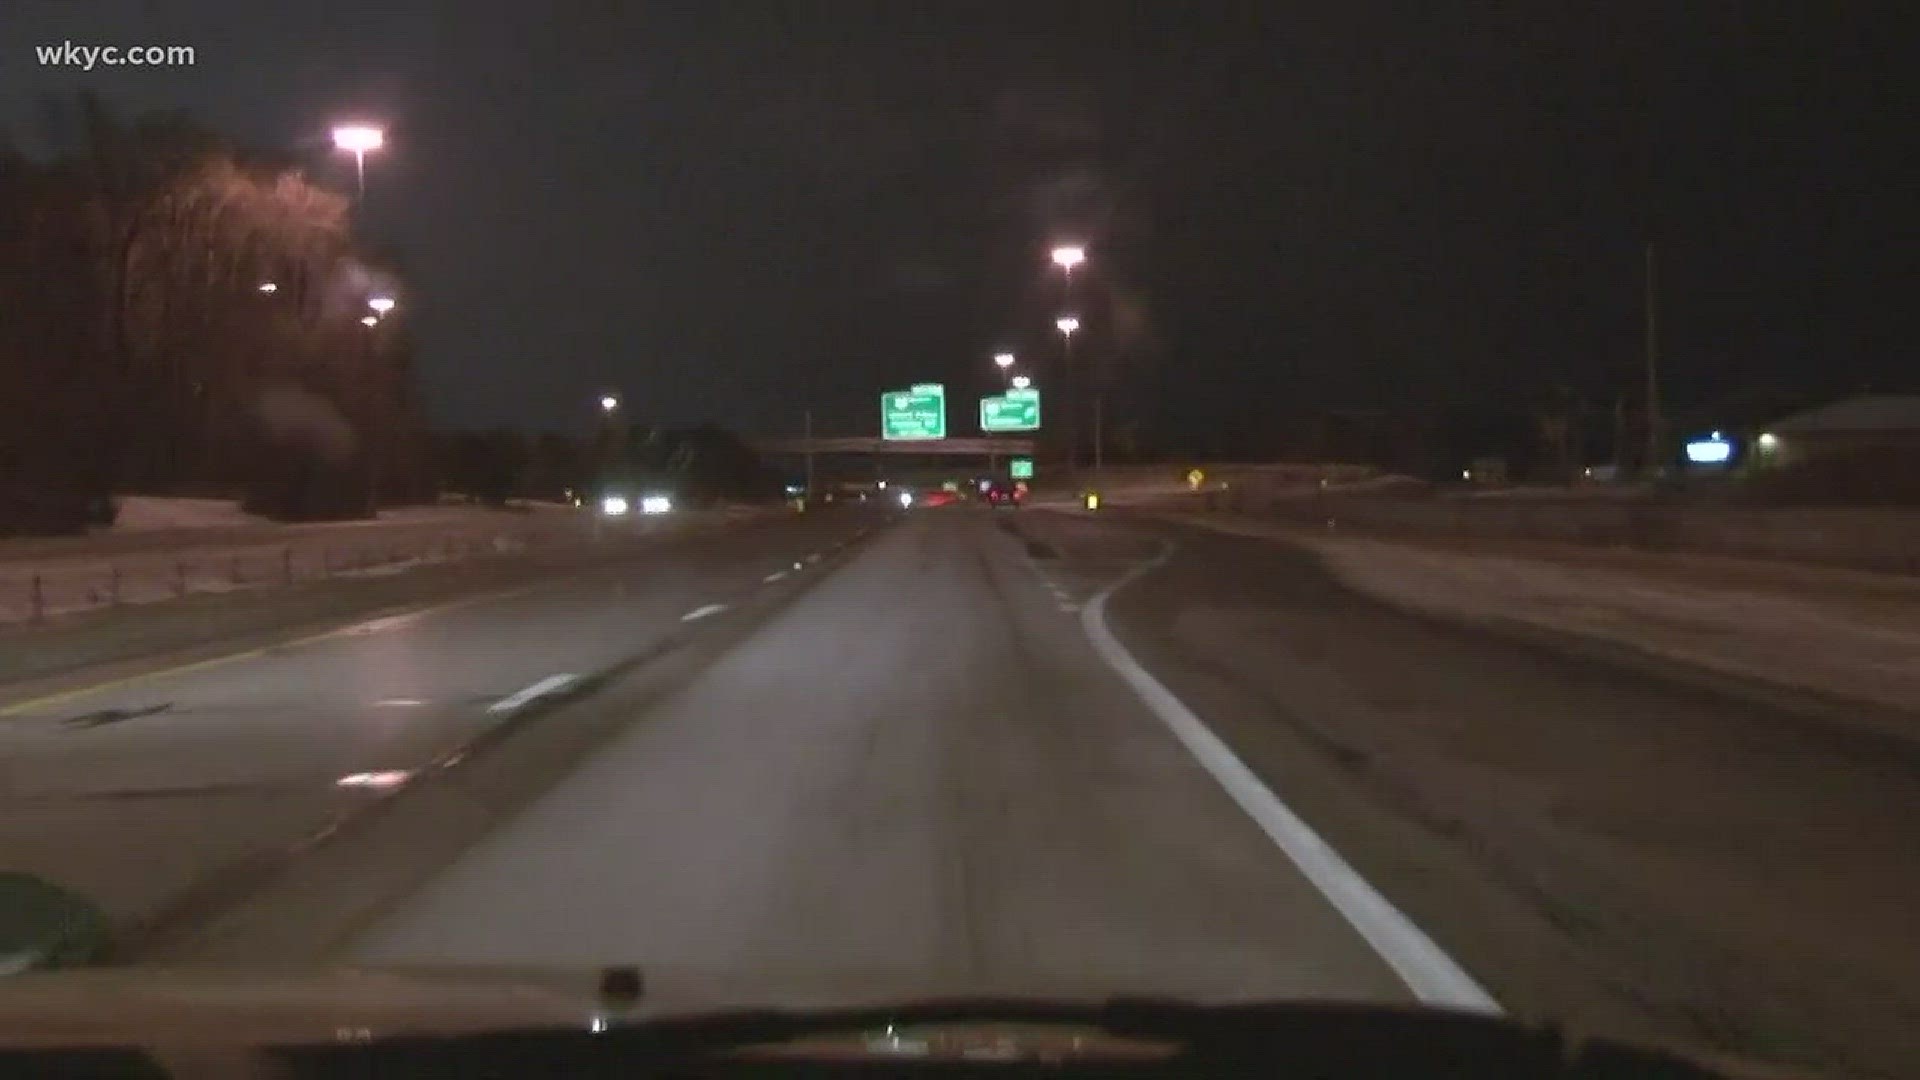 A look at the road conditions in Painesville with WKYC's Eric Sever.